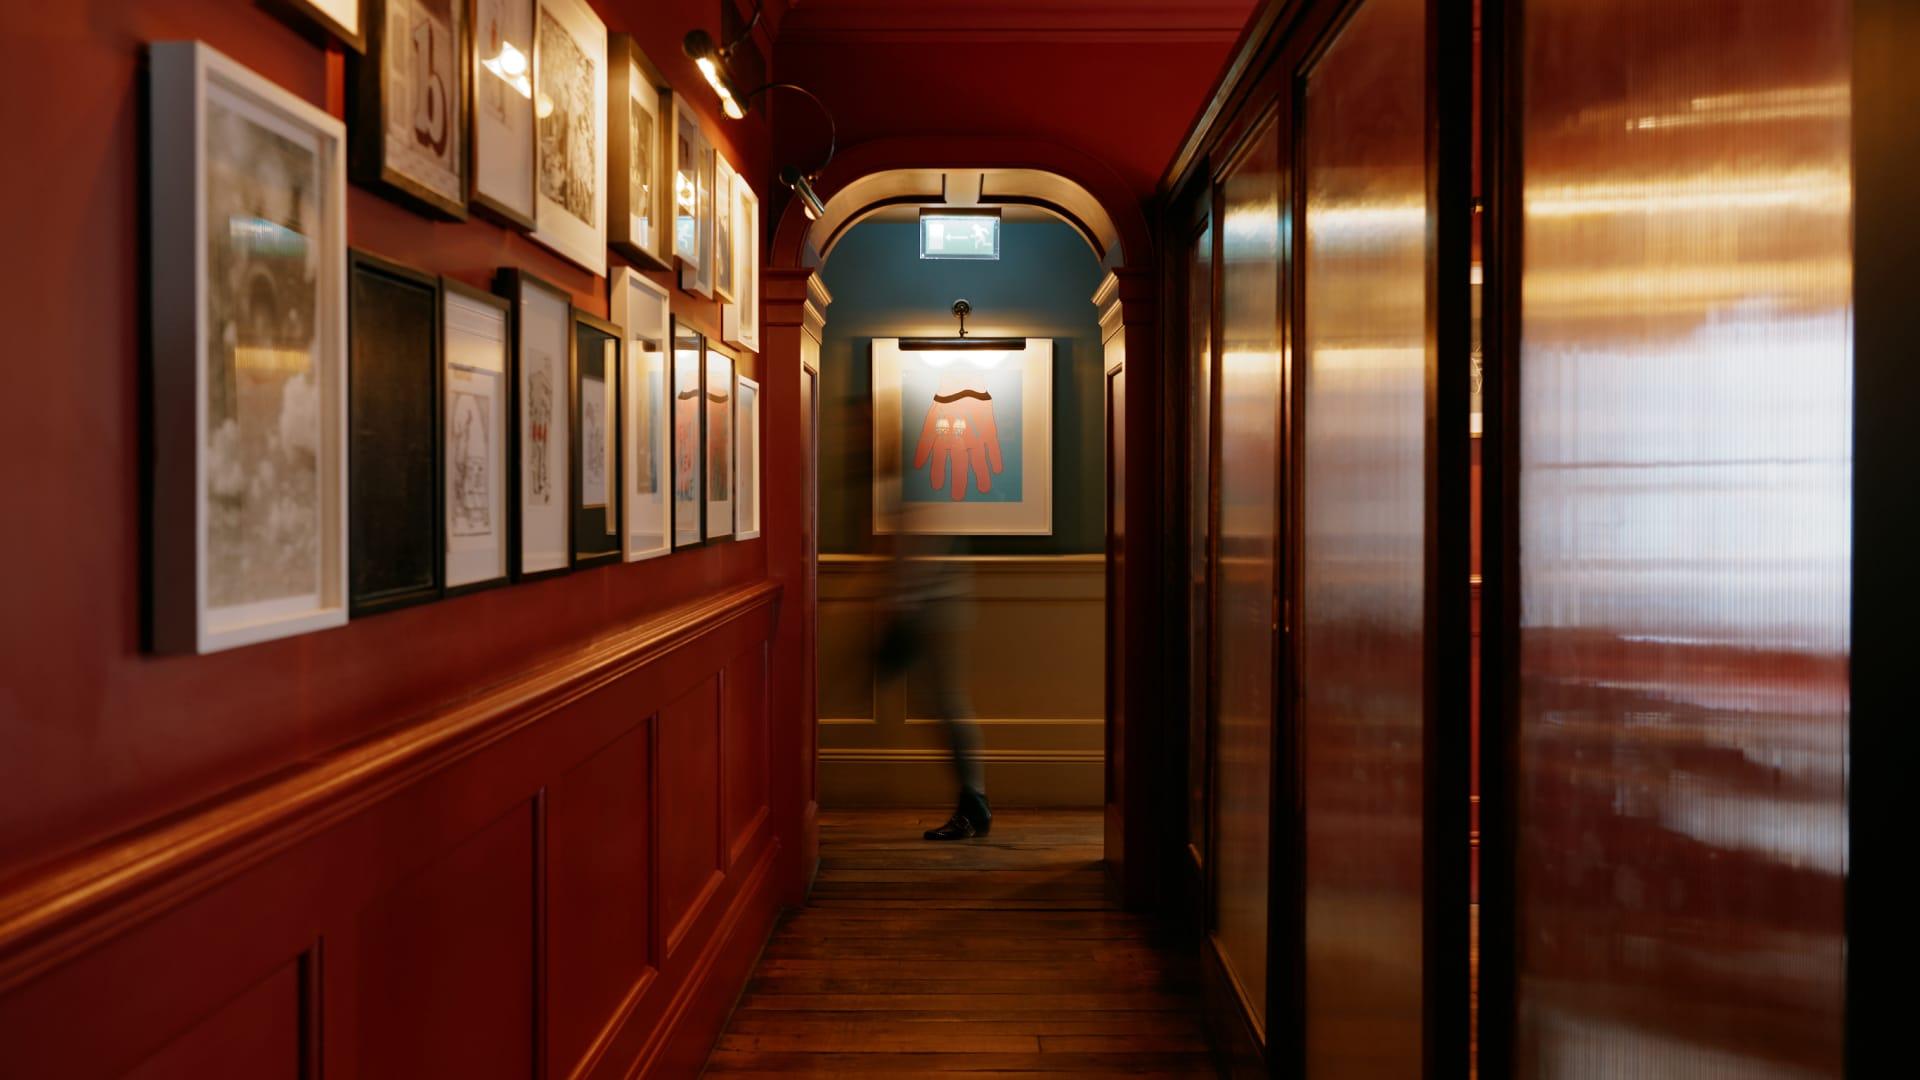 Focused image of a red and ebony wooden hall way. On the left-hand side is a wall with a series of black and white photo-frames. The images are not in focus. At the end of the hall is an unfocused person walking.